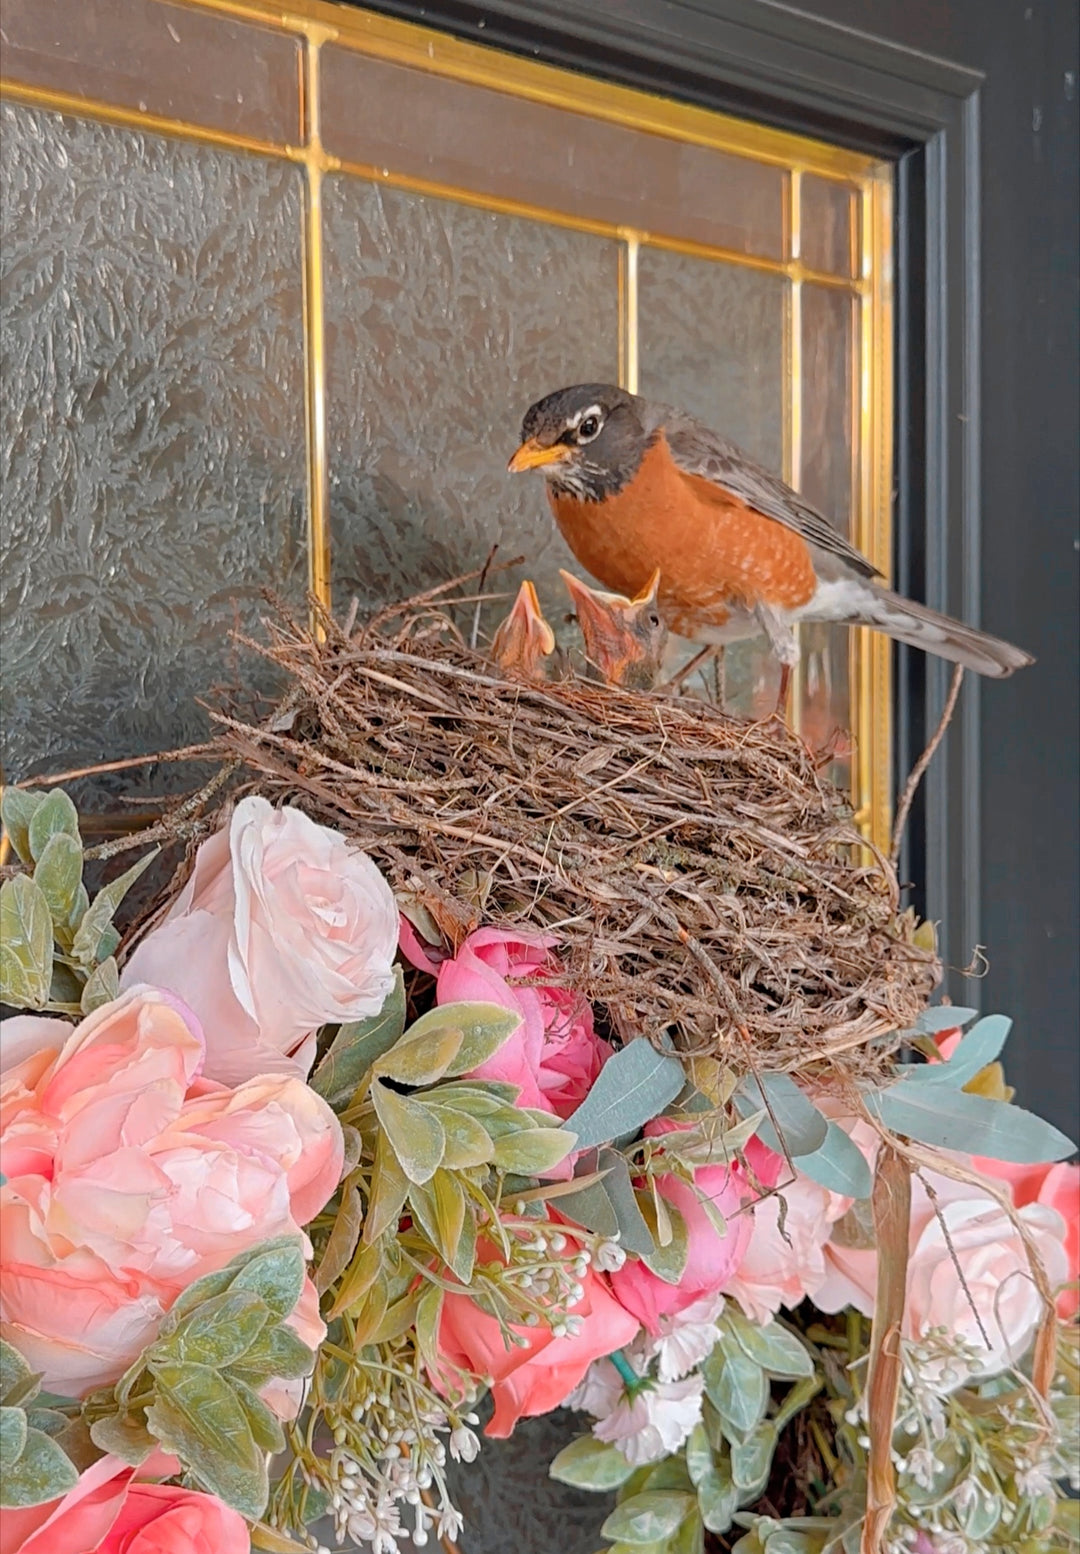 Family's Effort to Protect Robin Who Built Nest on Their Door Wreath Is Applause-Worthy